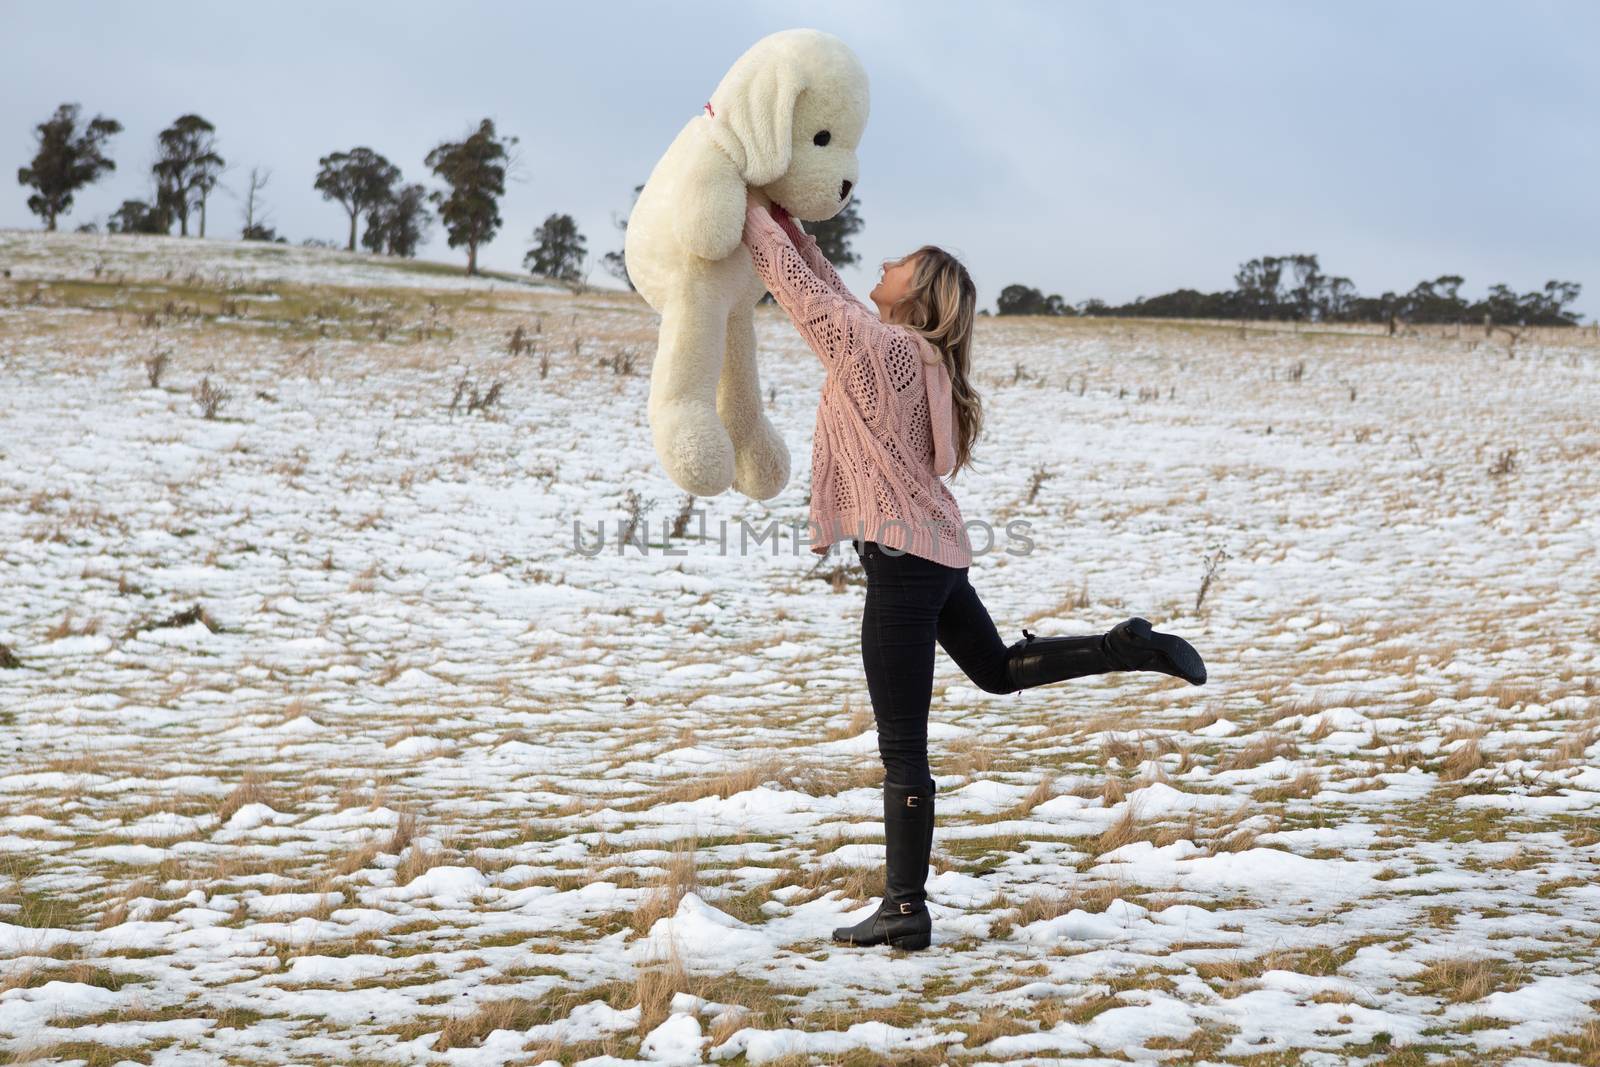 Woman frolicking in snow with stuffed bear